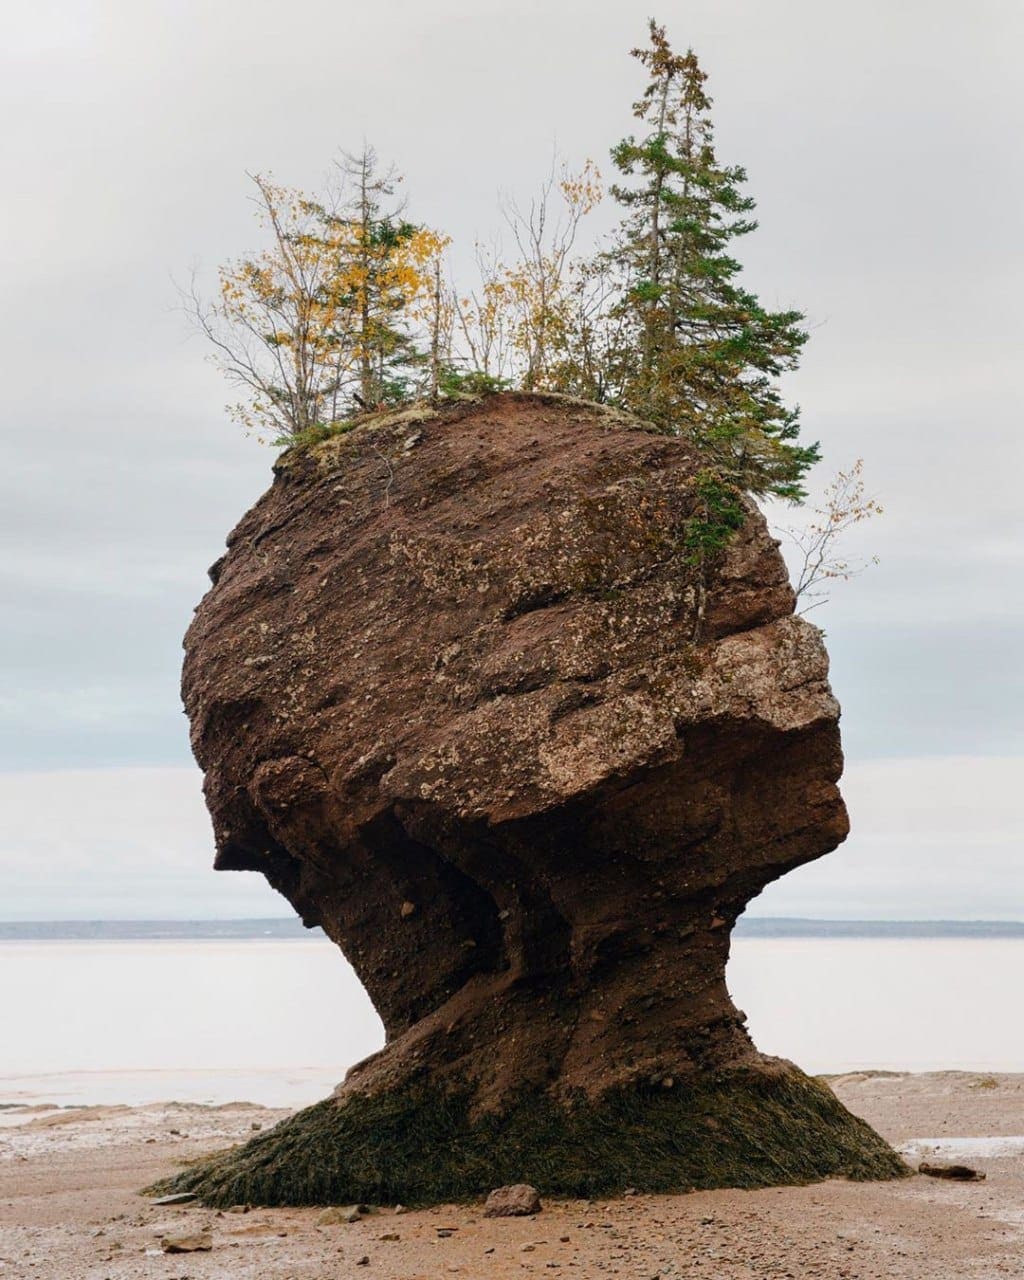 Stunning sculpture by nature in New Brunswick, Canada